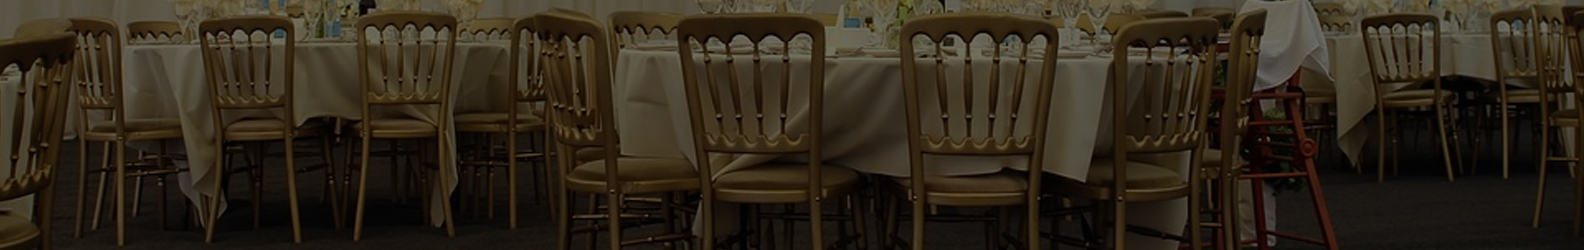 banquet-chairs